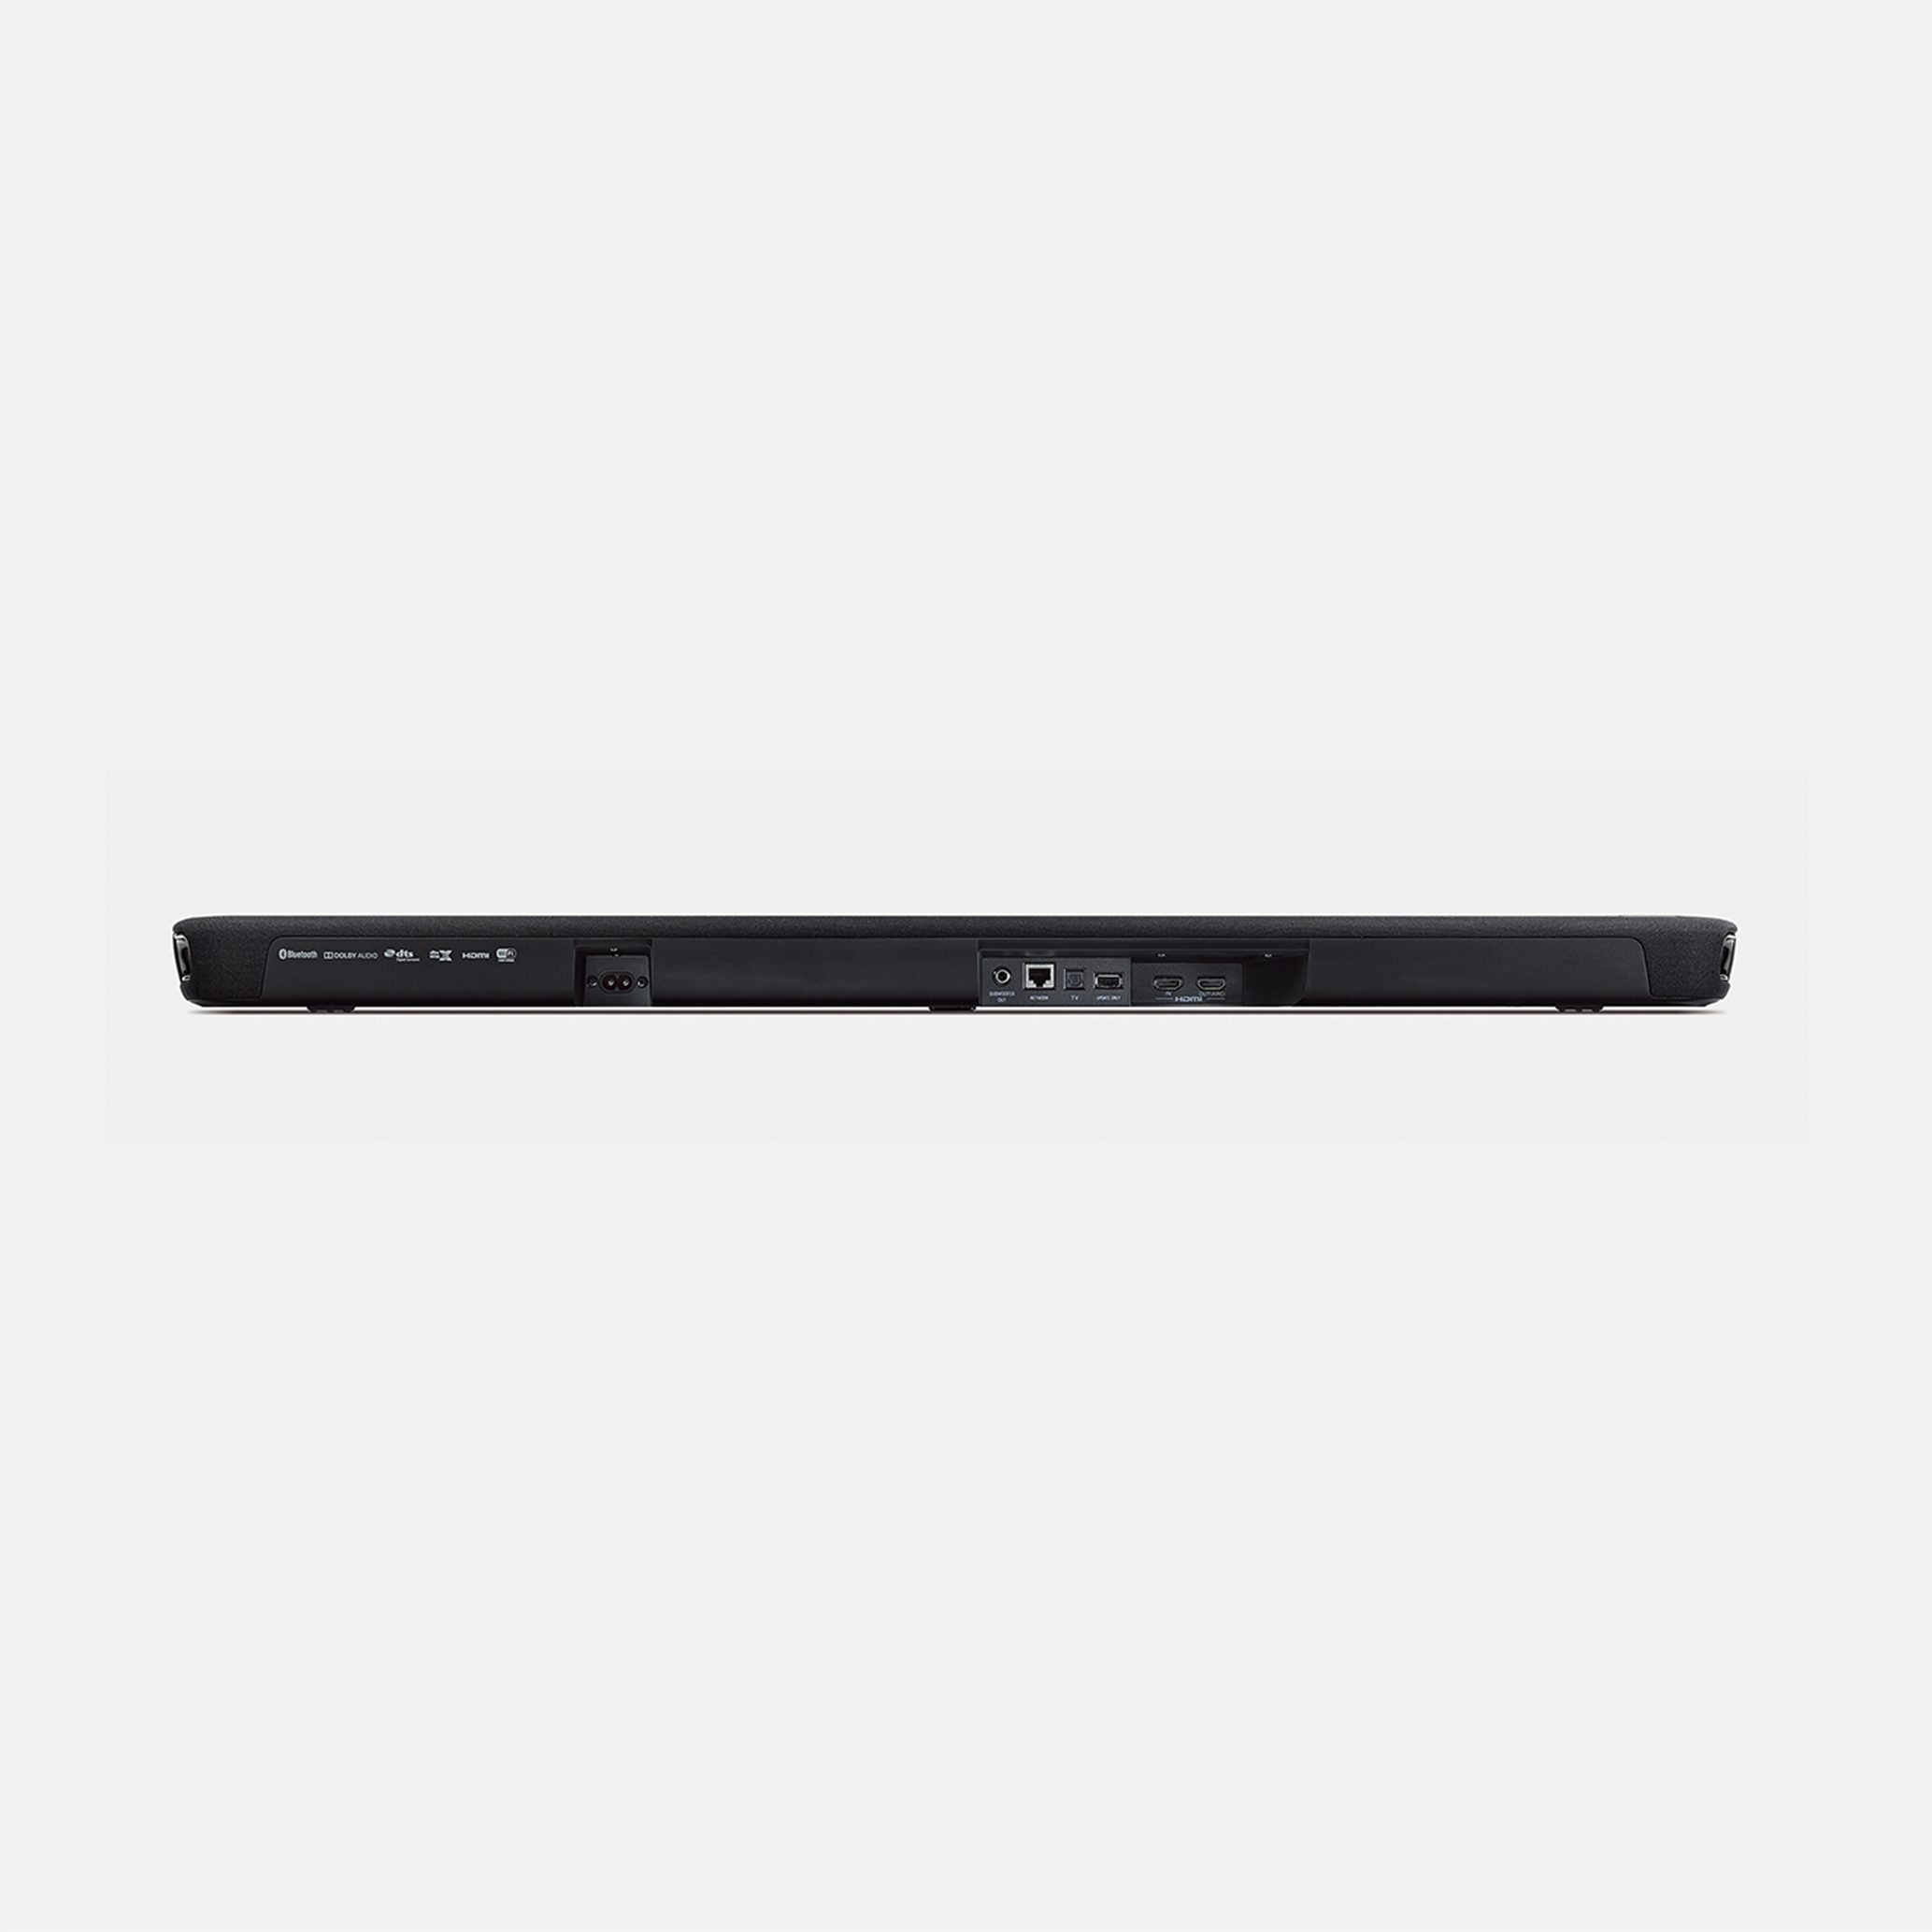 YAS-109 - Overview - Sound Bar - Audio & Visual - Products 